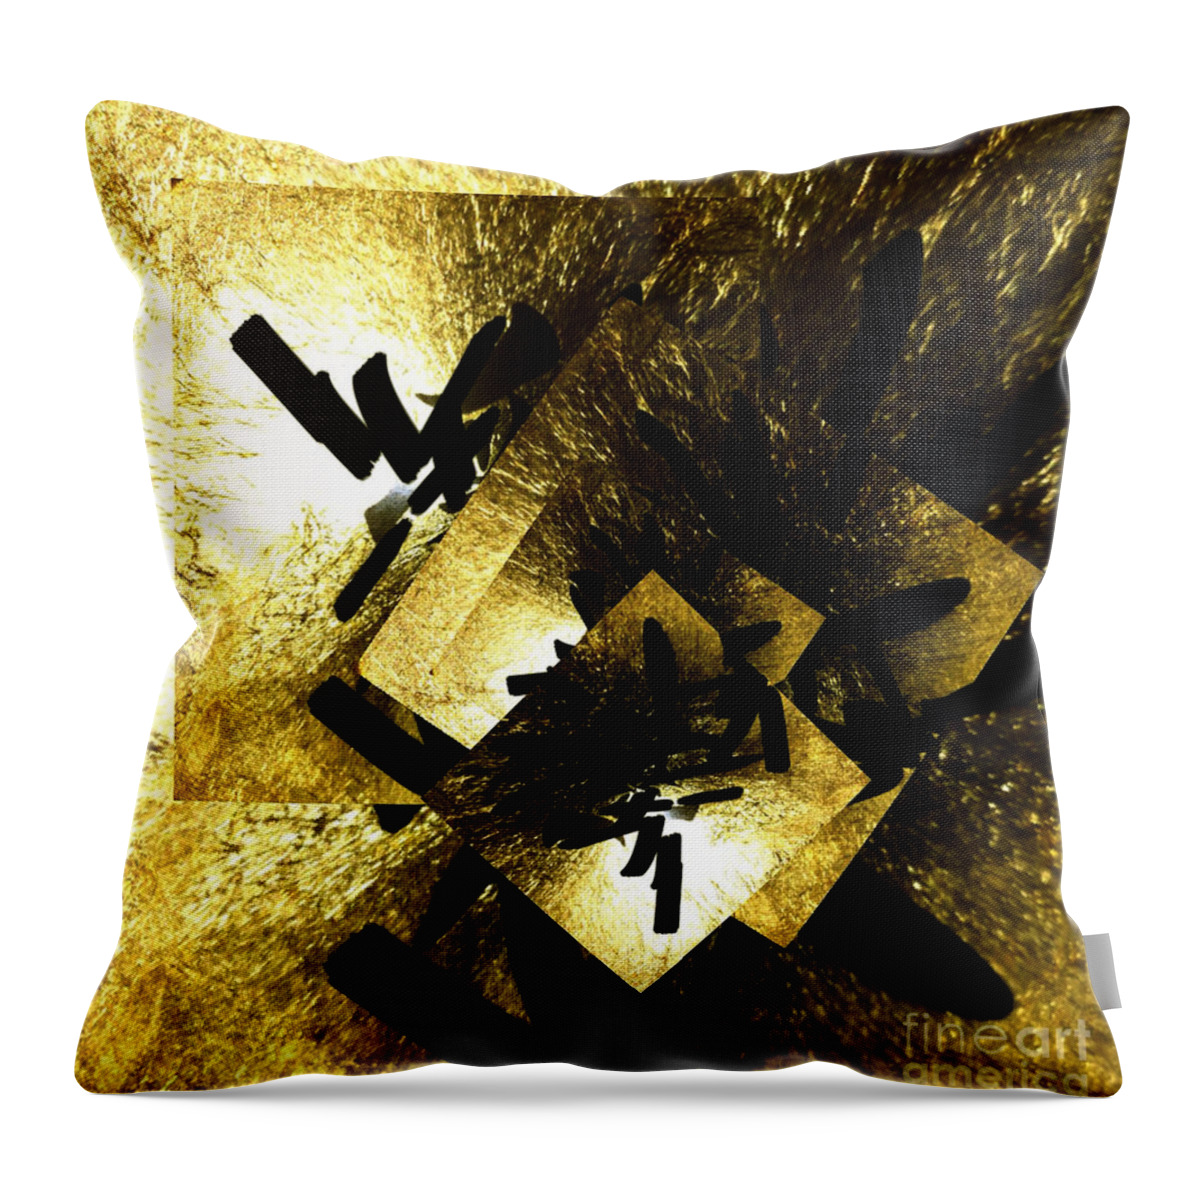 Abstract Golden Time Of Day Dark Colors Throw Pillow featuring the digital art Golden Time of Day by Gayle Price Thomas